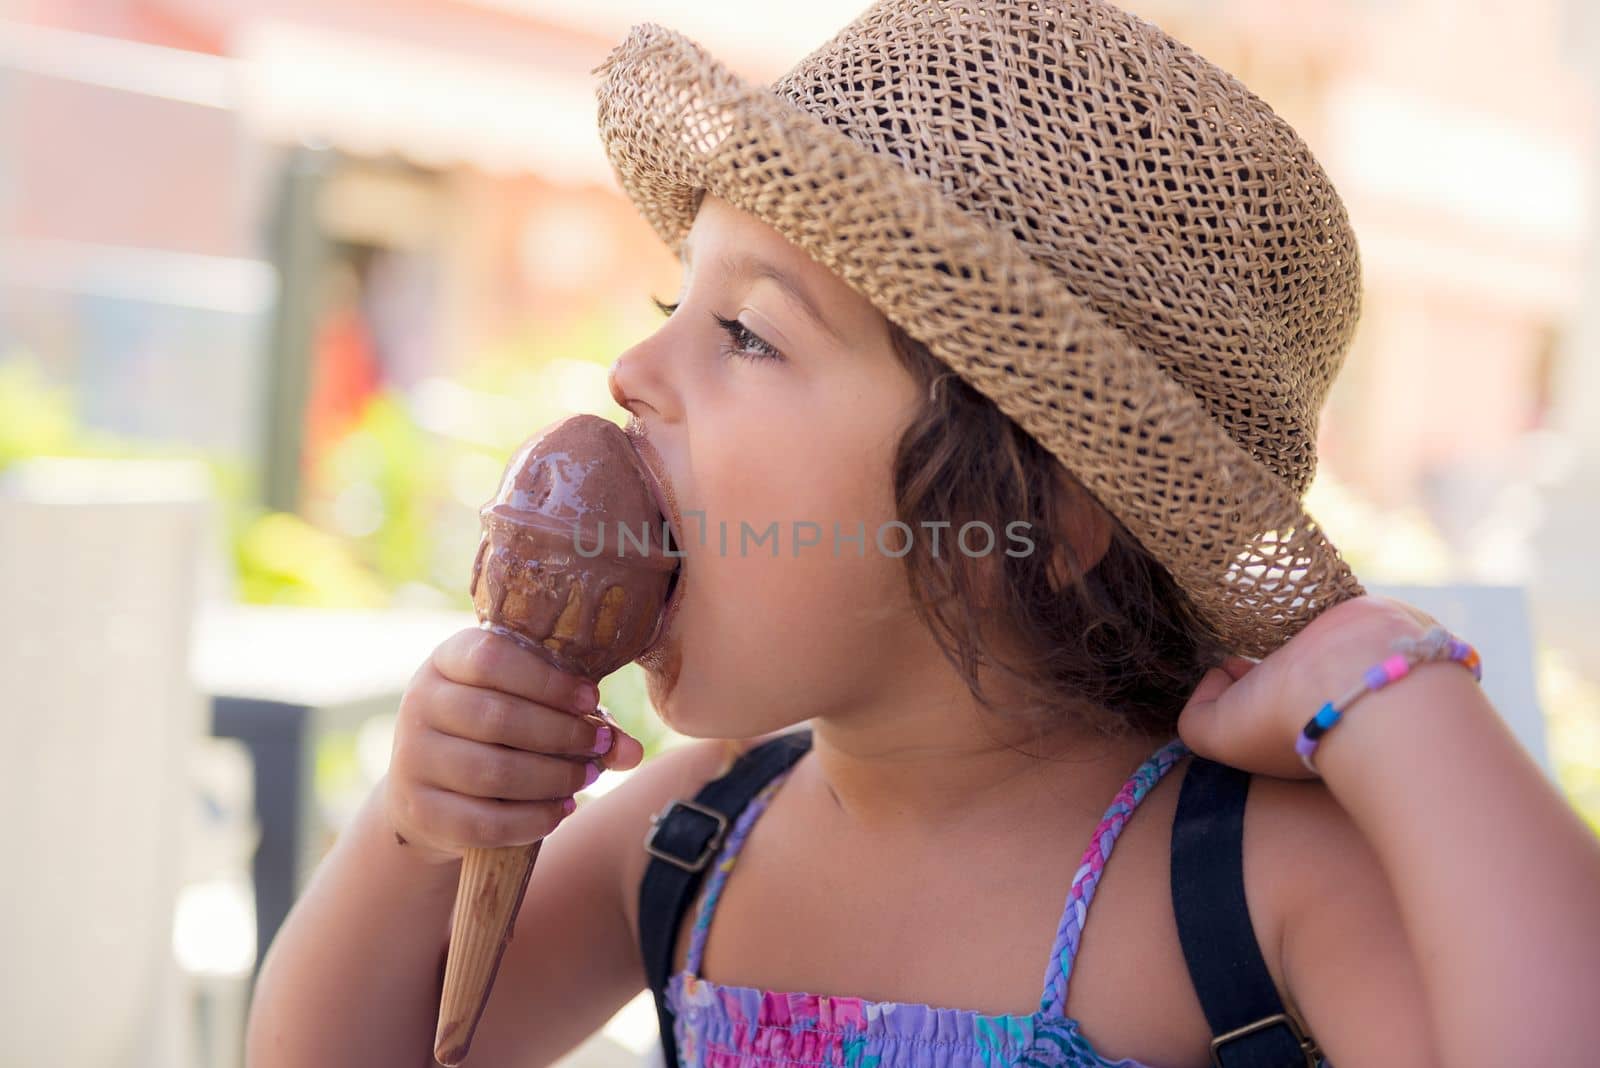 Little girl with a straw hat and a summer dress enjoys the summer heat eating a refreshing ice cream cone, it melts in her hand while she smiles funny with her mouth and nose stained with chocolate